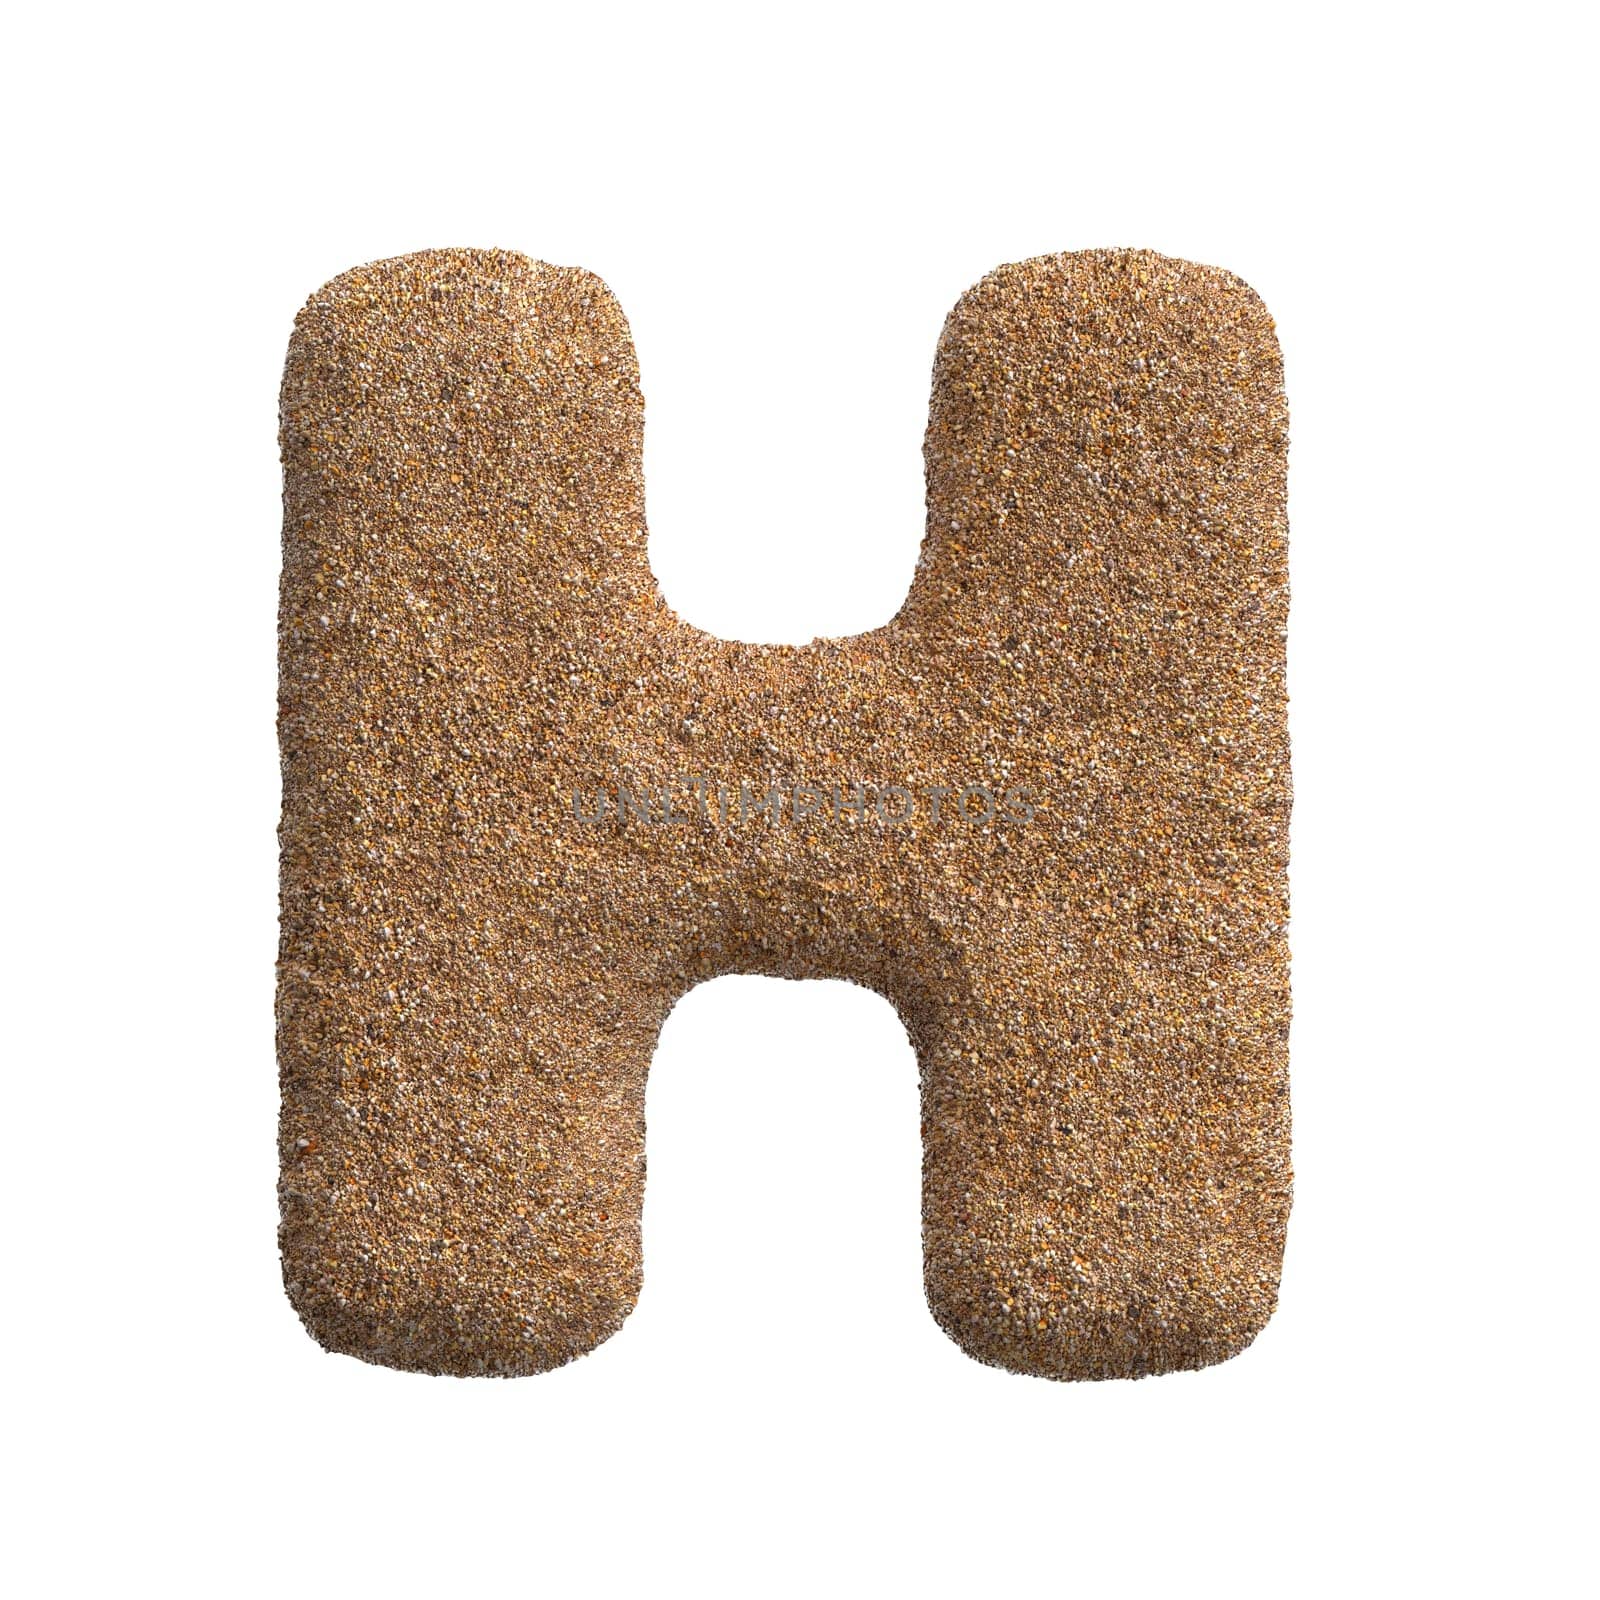 Sand letter H - Upper-case 3d beach font - Holidays, travel or ocean concepts by chrisroll